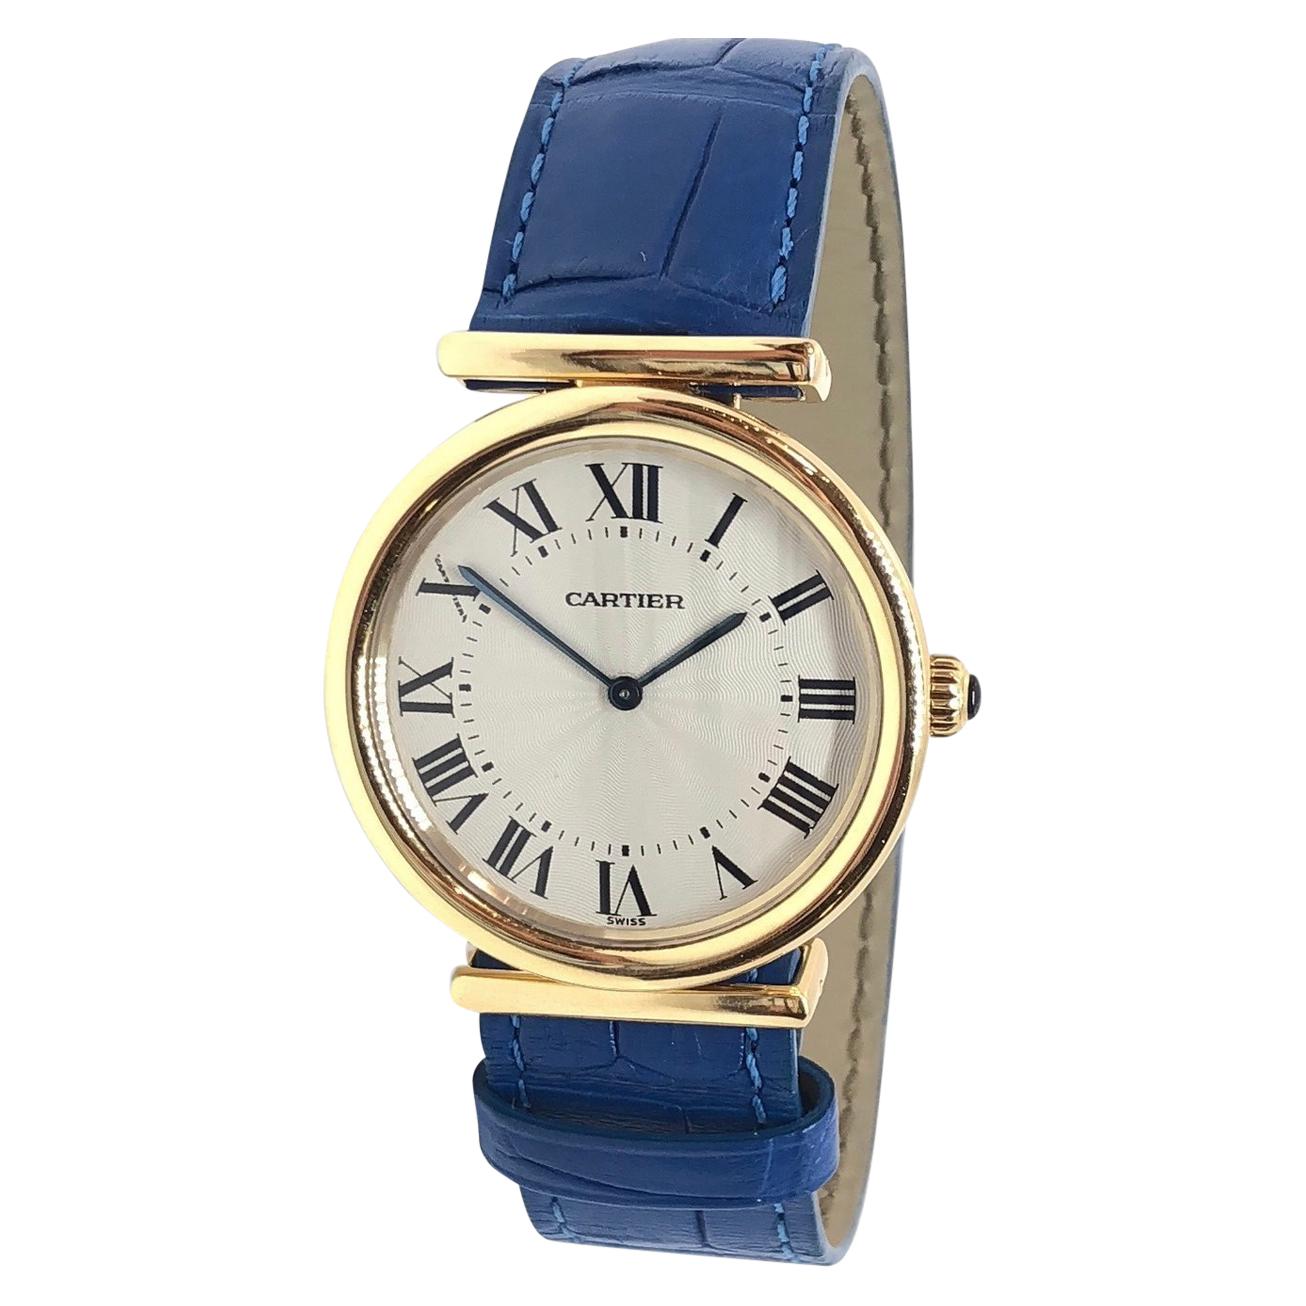 Classic round Cartier Bi-Plan timepiece with a unique hidden clasp. Brand new french blue Cartier leather strap. Excellent like-new condition, no scratches or wear. 

•MOVEMENT: MECHANICAL HAND WINDING
•CASE MATERIAL: 18K YELLOW GOLD
•CONDITION: